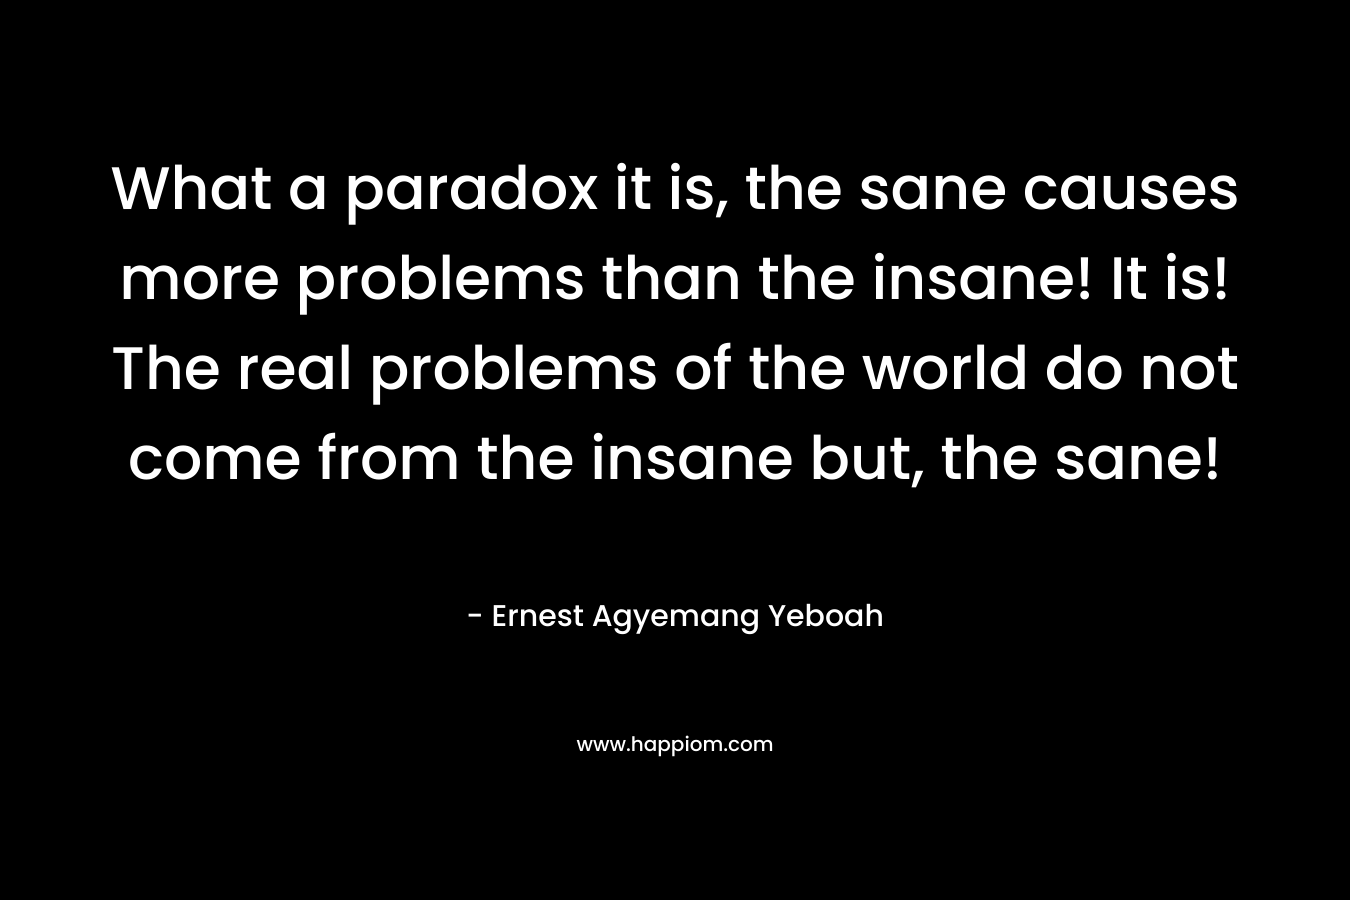 What a paradox it is, the sane causes more problems than the insane! It is! The real problems of the world do not come from the insane but, the sane!